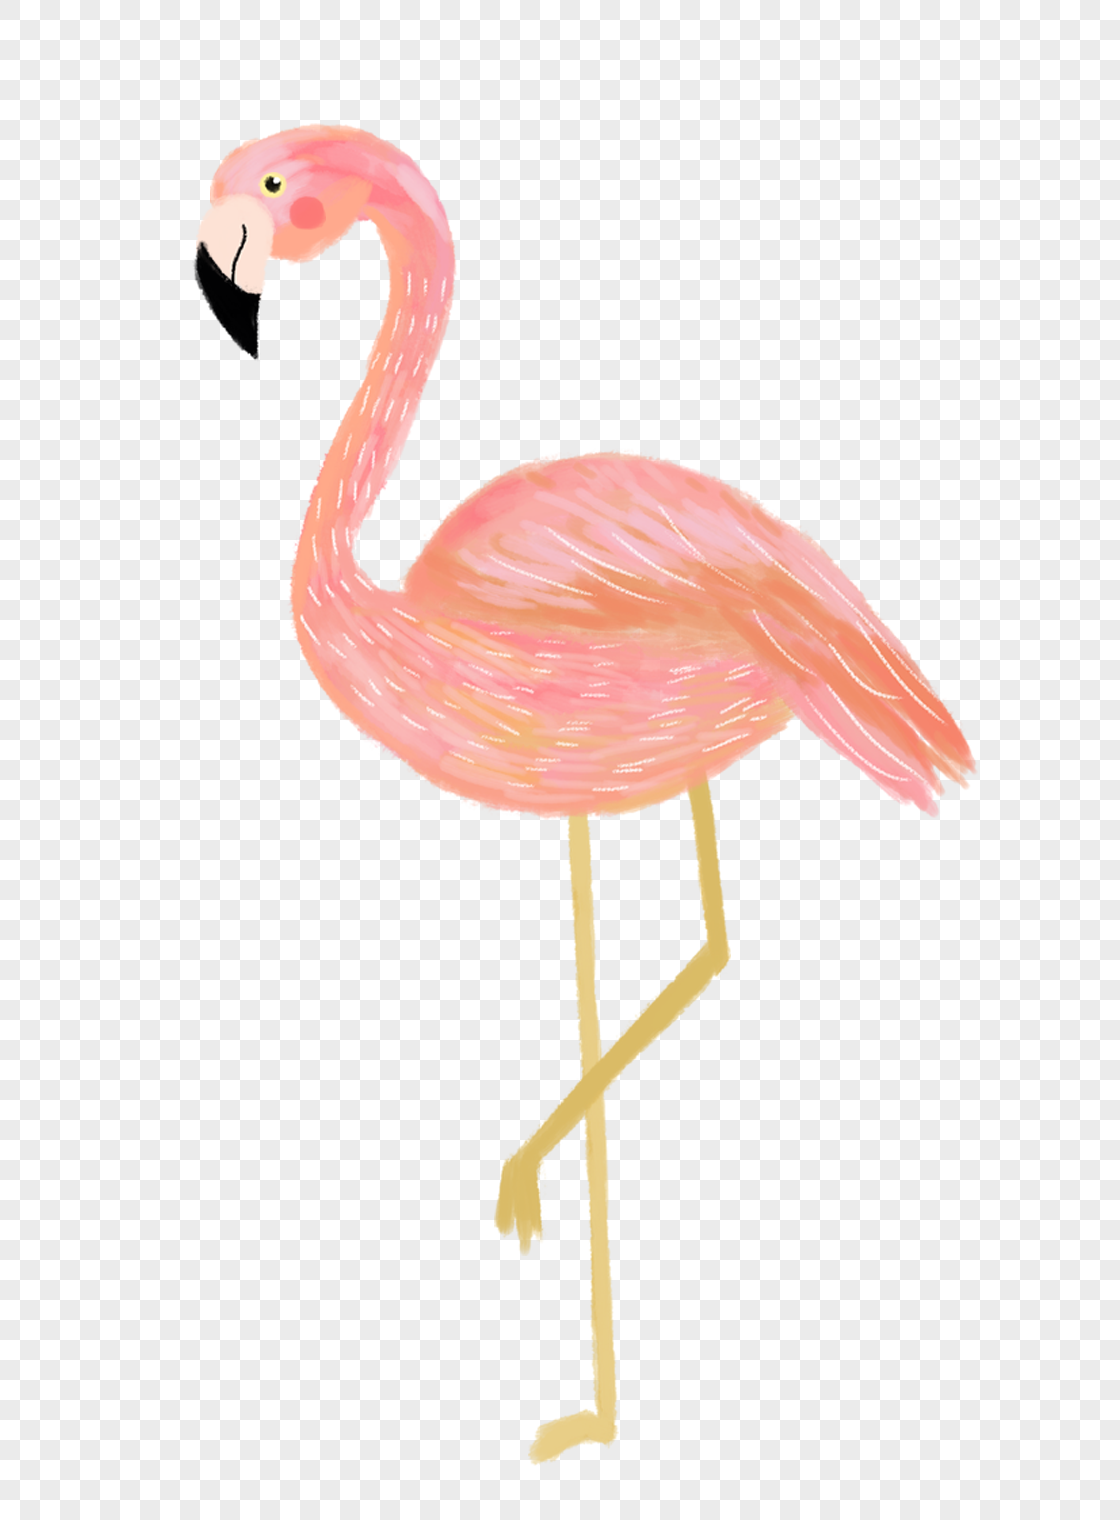 Flamingo Transparent PNG Pictures - Free Icons and PNG Backgrounds